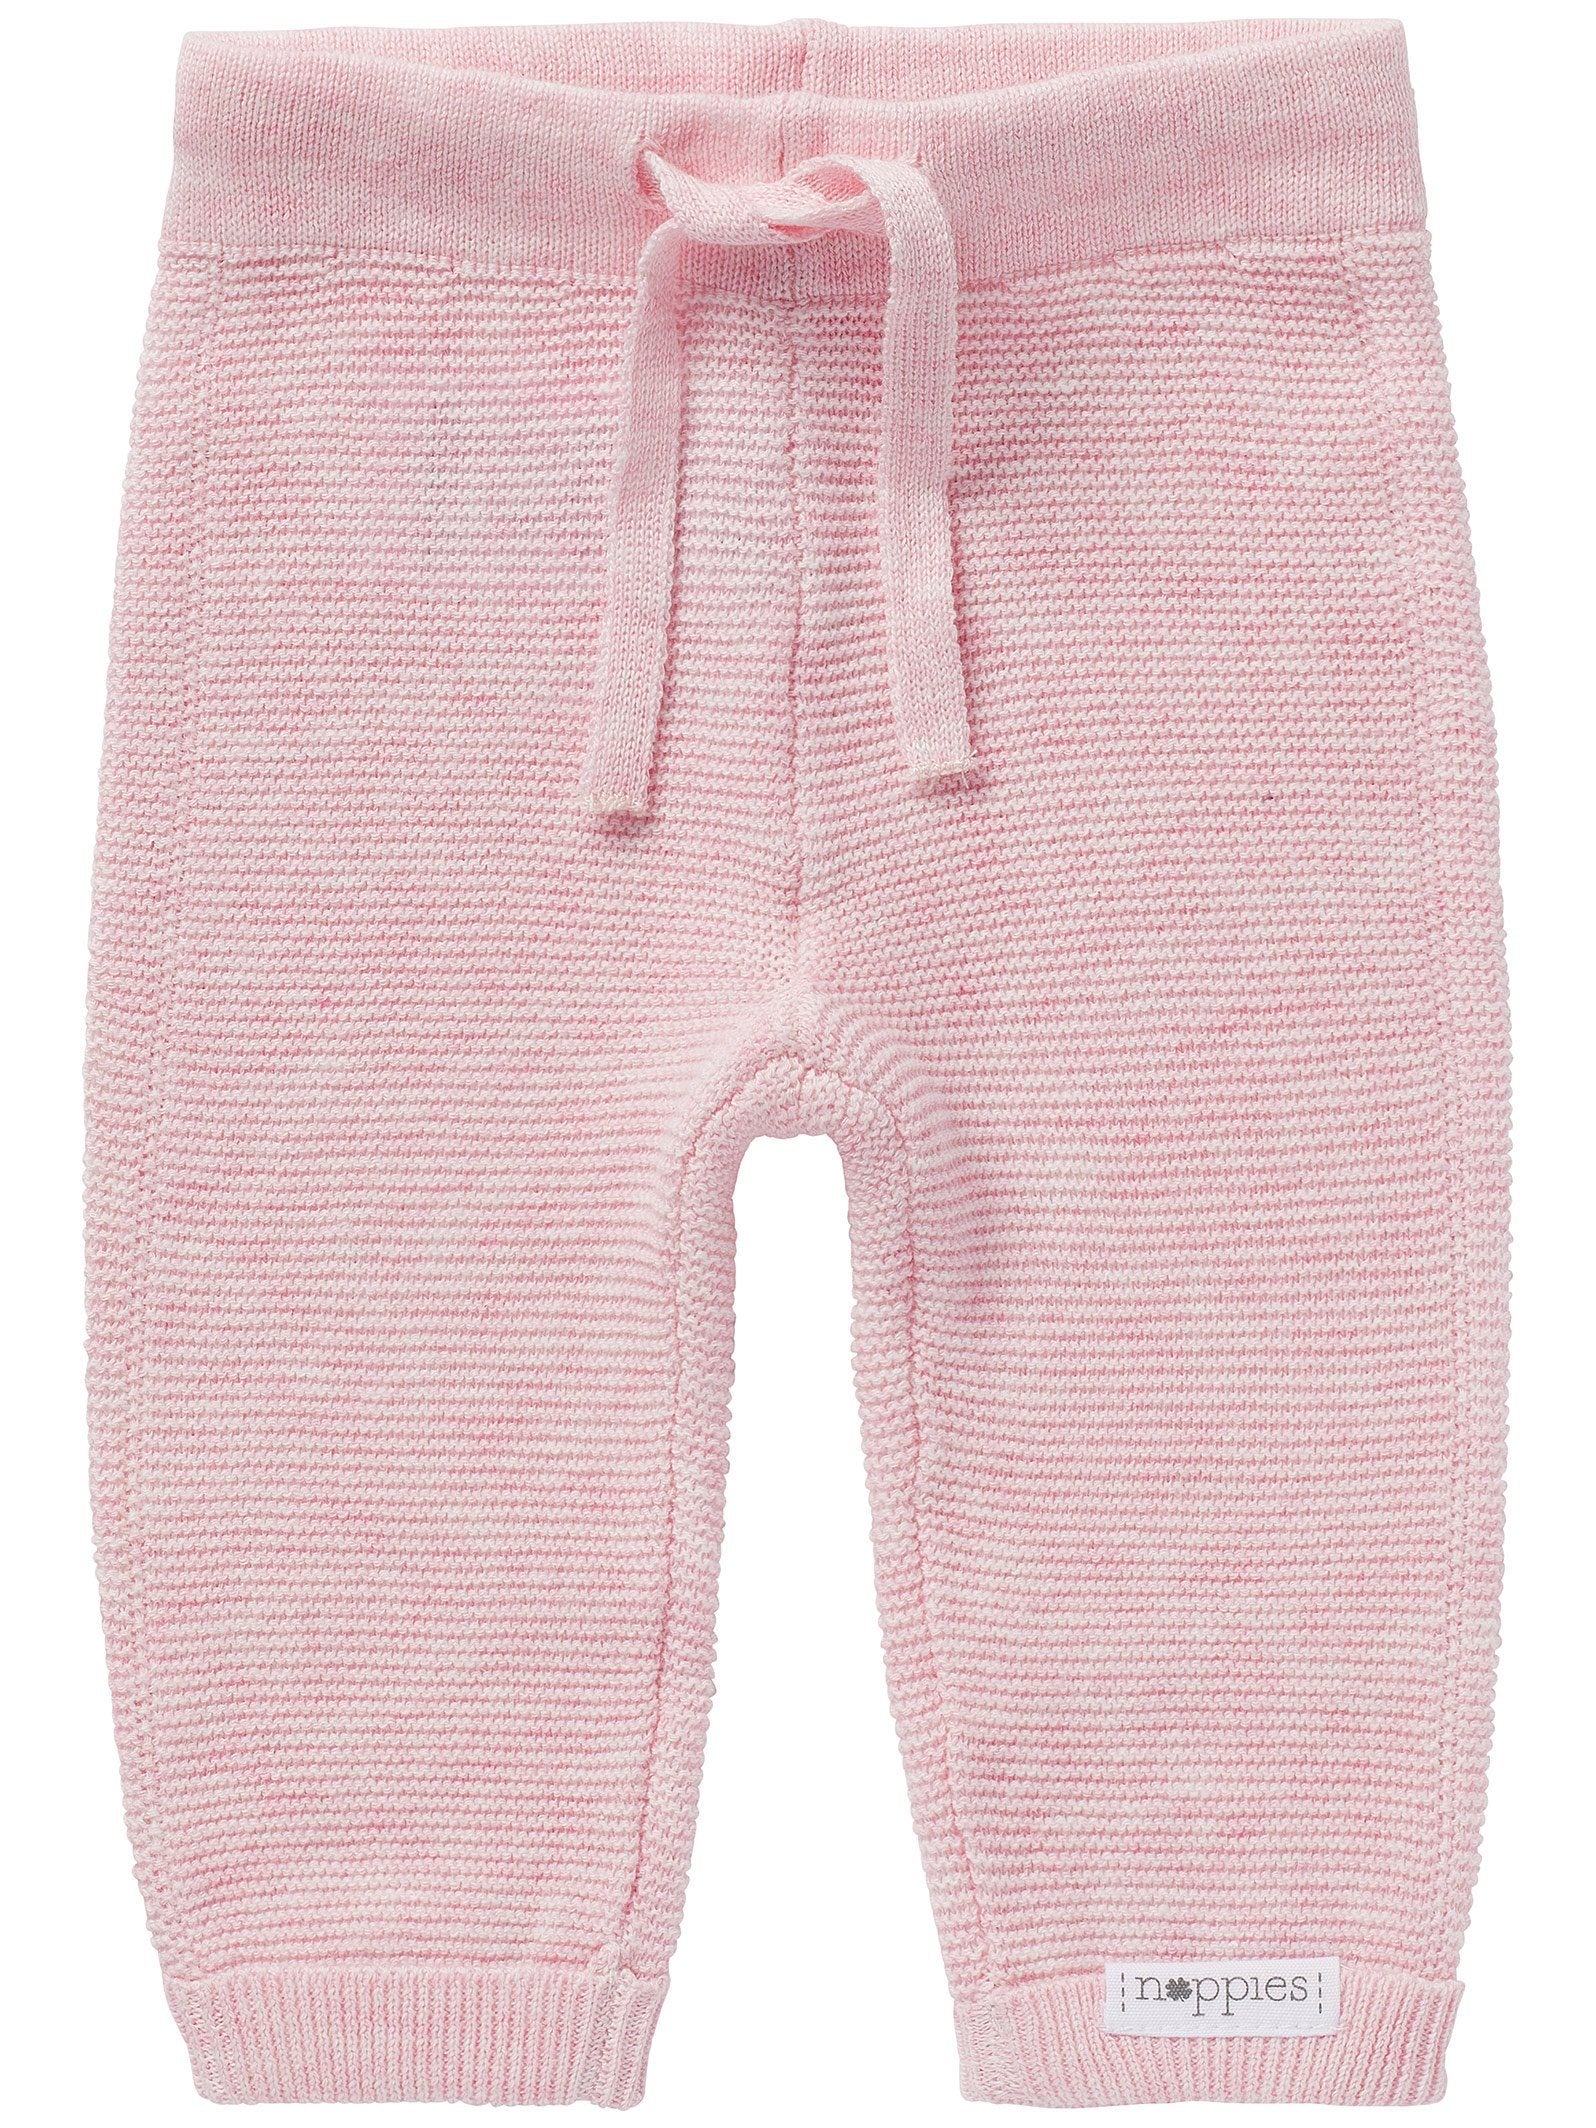 Pink Knitted Trousers - Organic Cotton Trousers / Leggings Noppies 